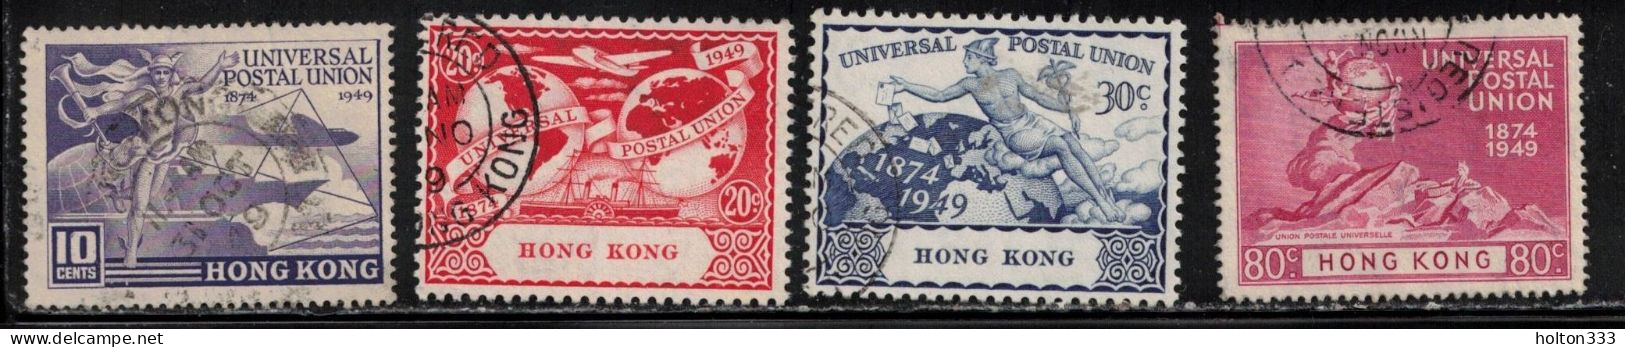 HONG KONG Scott # 180-3 Used - 1949 UPU Issue - Used Stamps